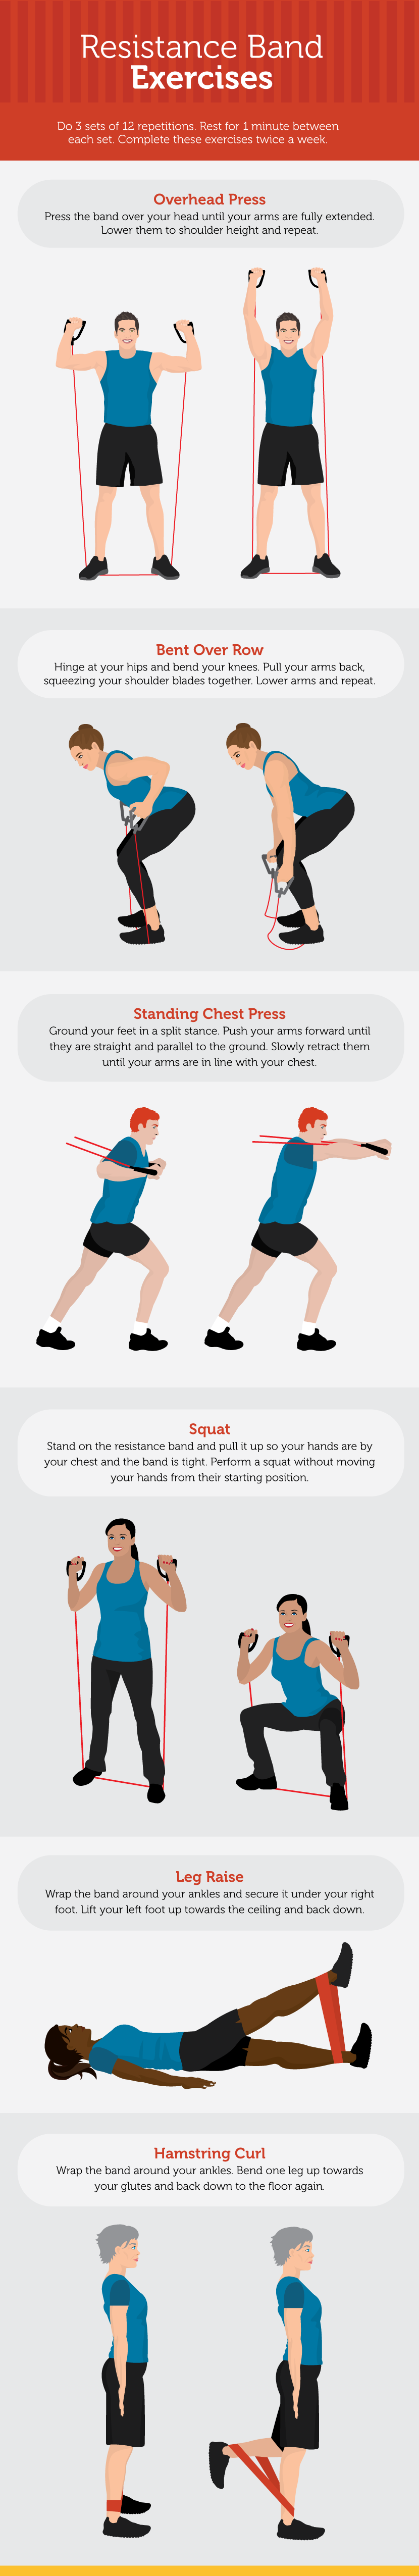 5 Top Resistance Band Exercises for You